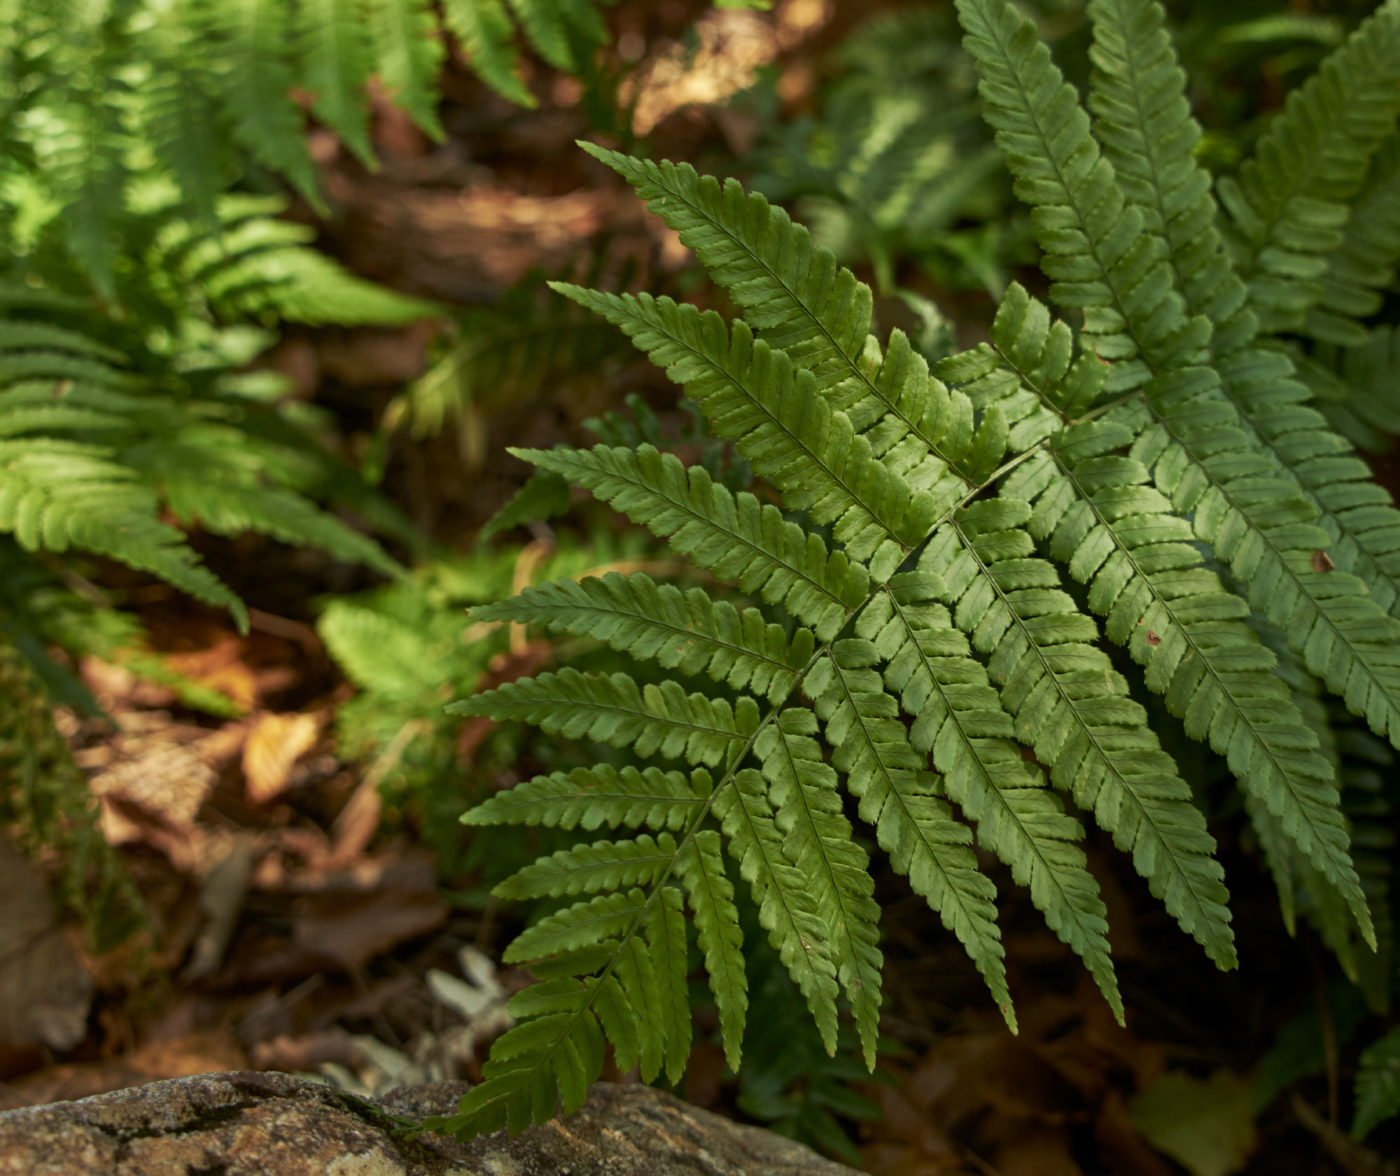 A detail photo of green ferns in the woods.